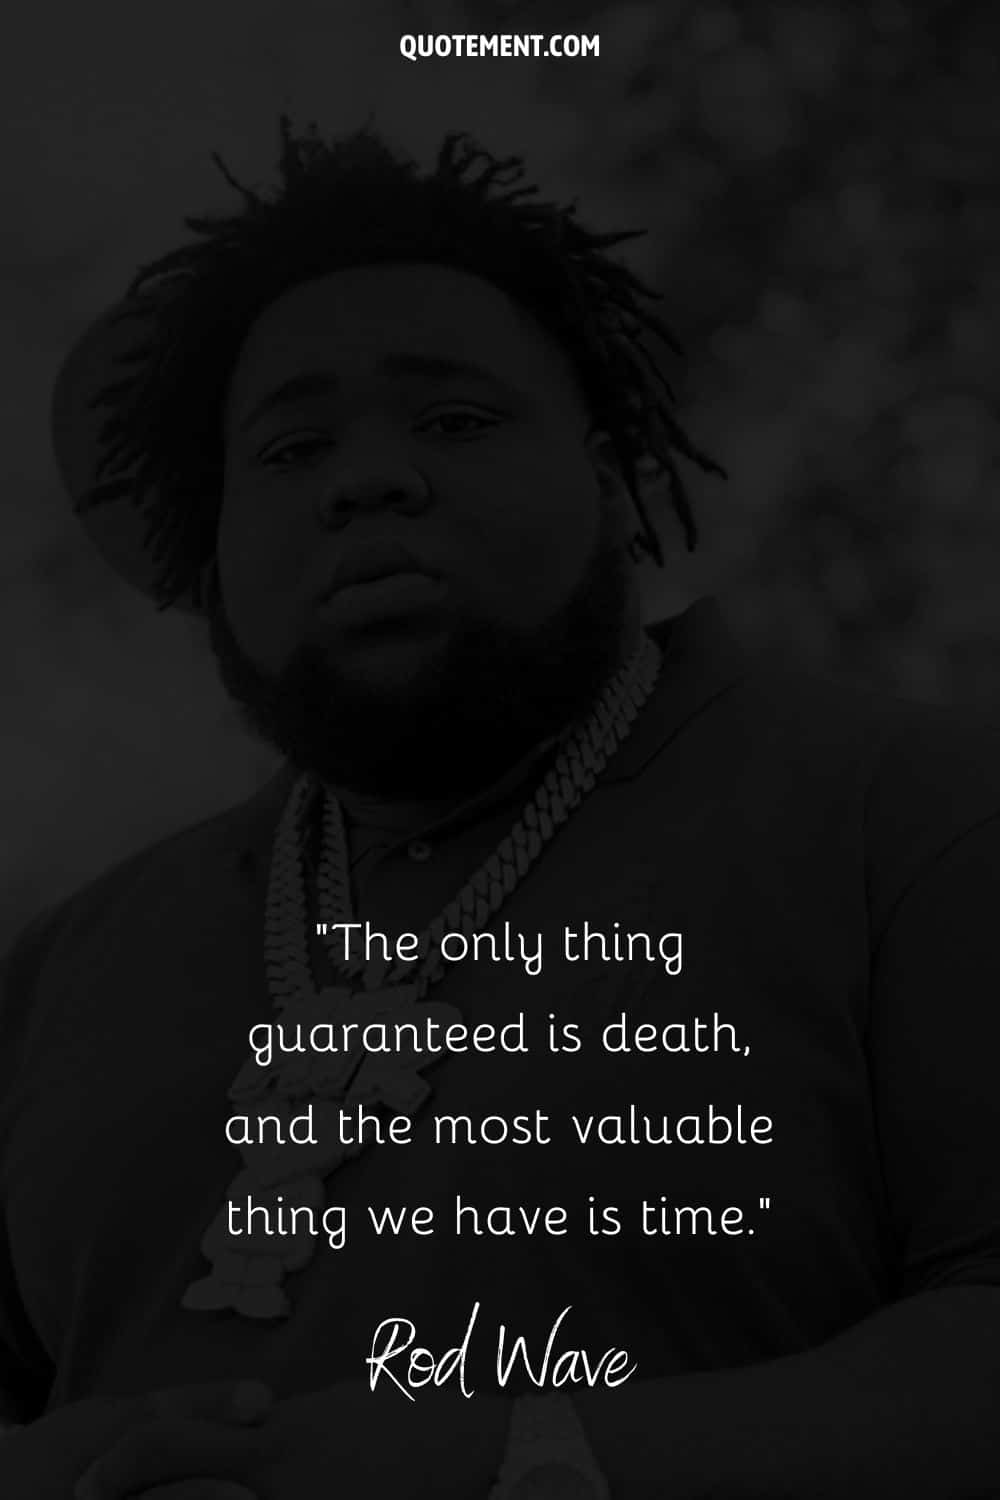 “The only thing guaranteed is death, and the most valuable thing we have is time.” — Rod Wave